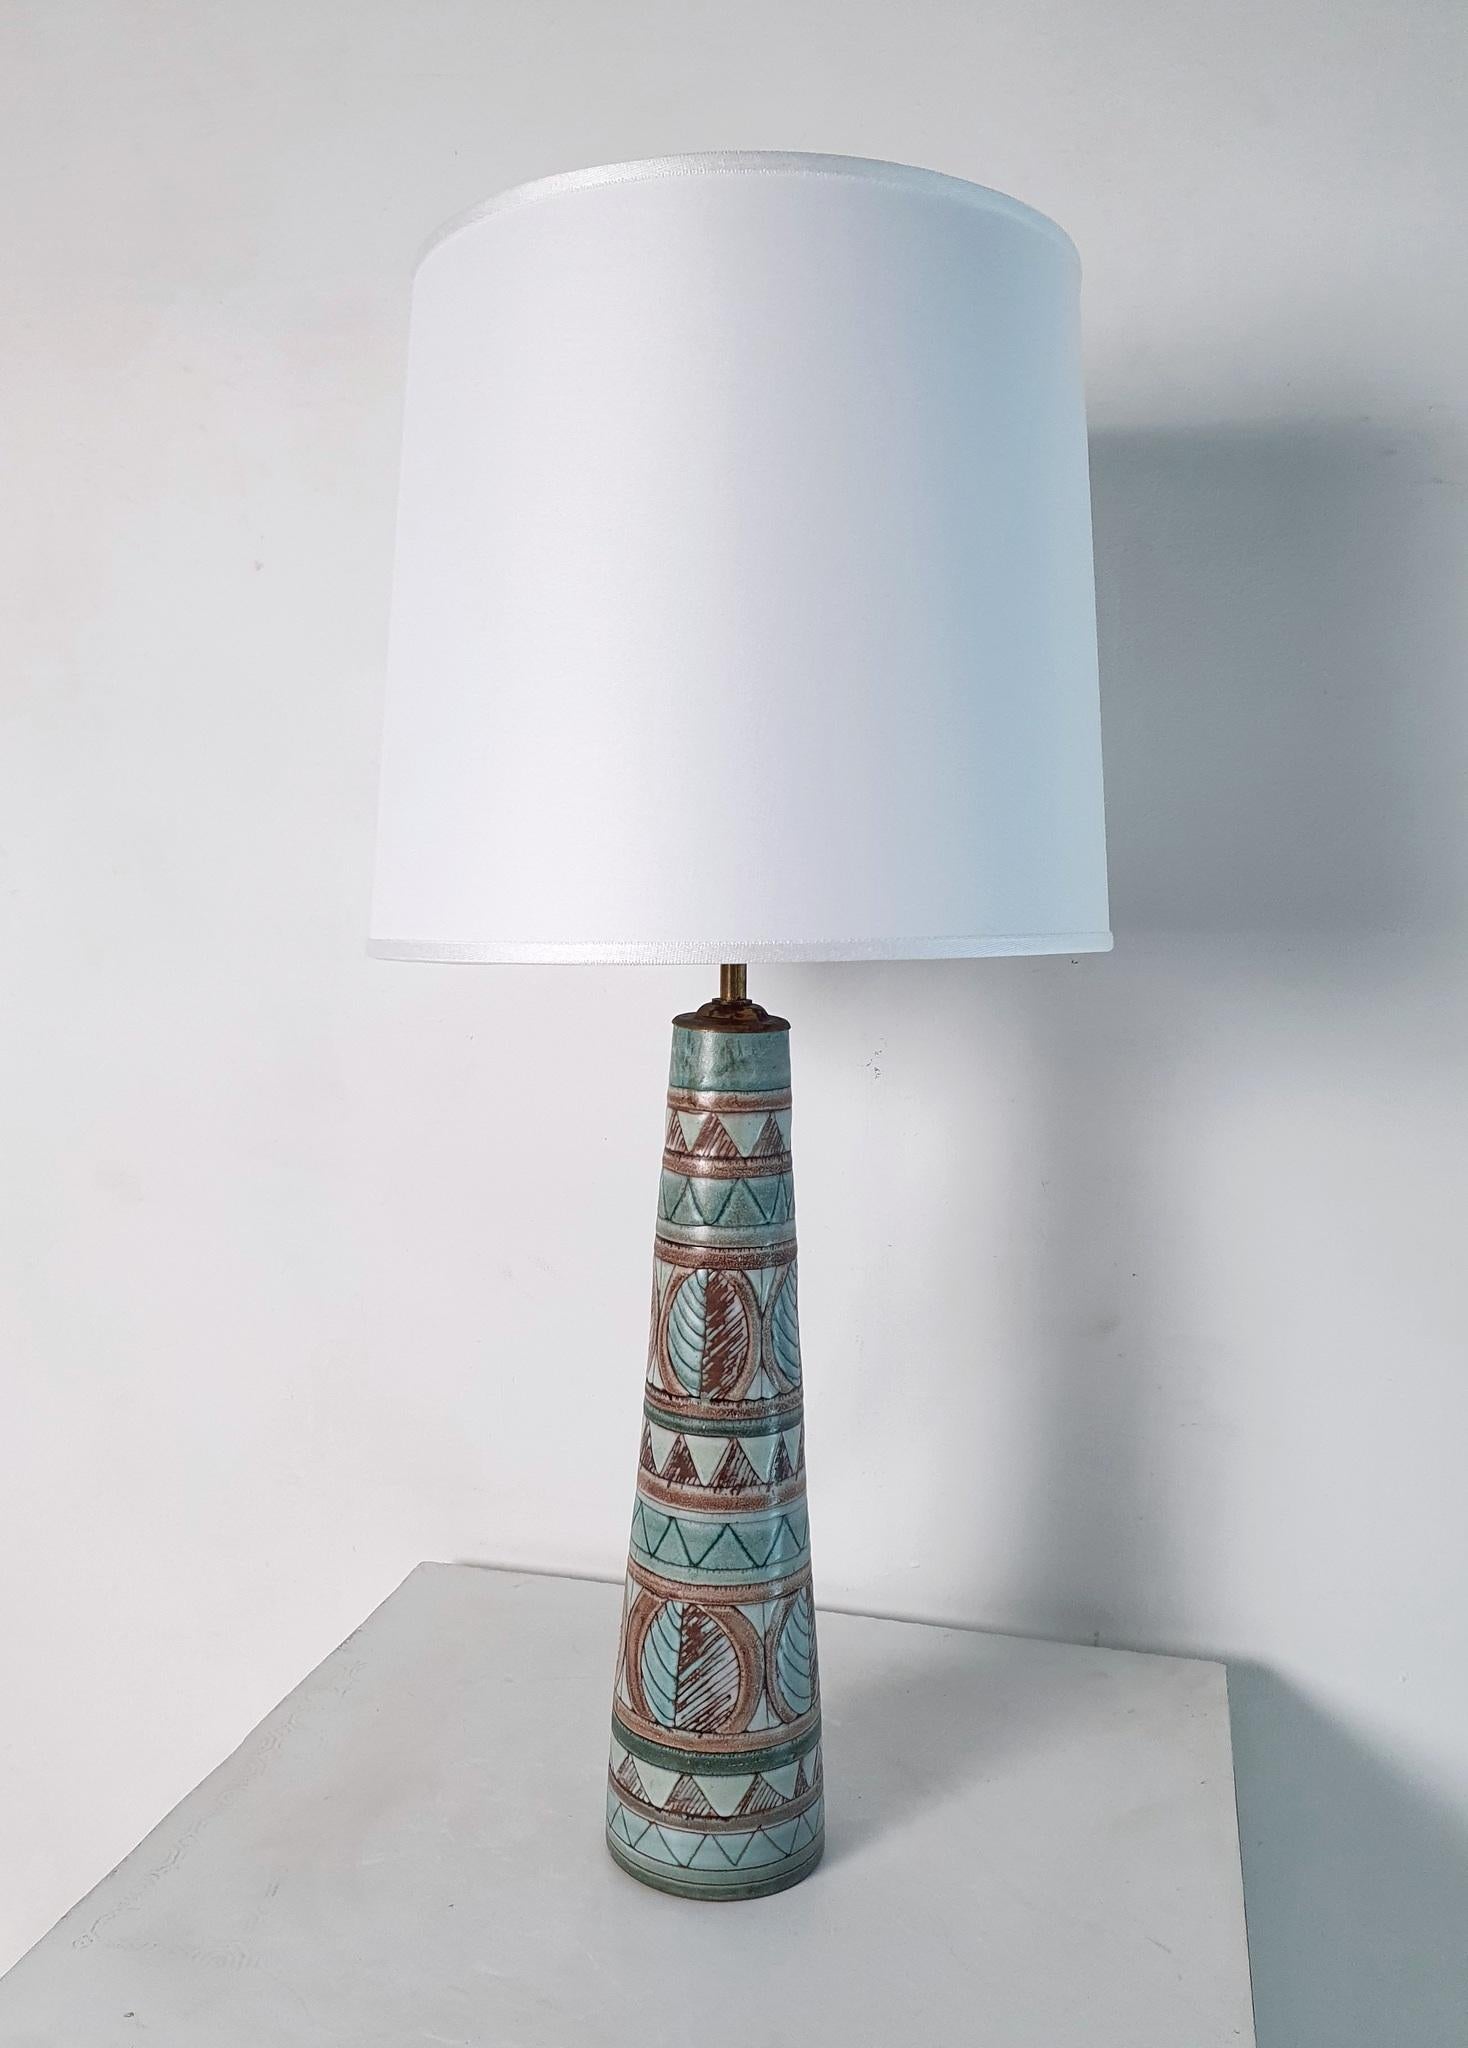 Indulge your inner collector with this exquisite mid century lamp by the renowned Swedish ceramicist Irma Yourstone. With its unique design and exceptional quality, this lamp is a true gem that's not often found. Feast your eyes on the flawless